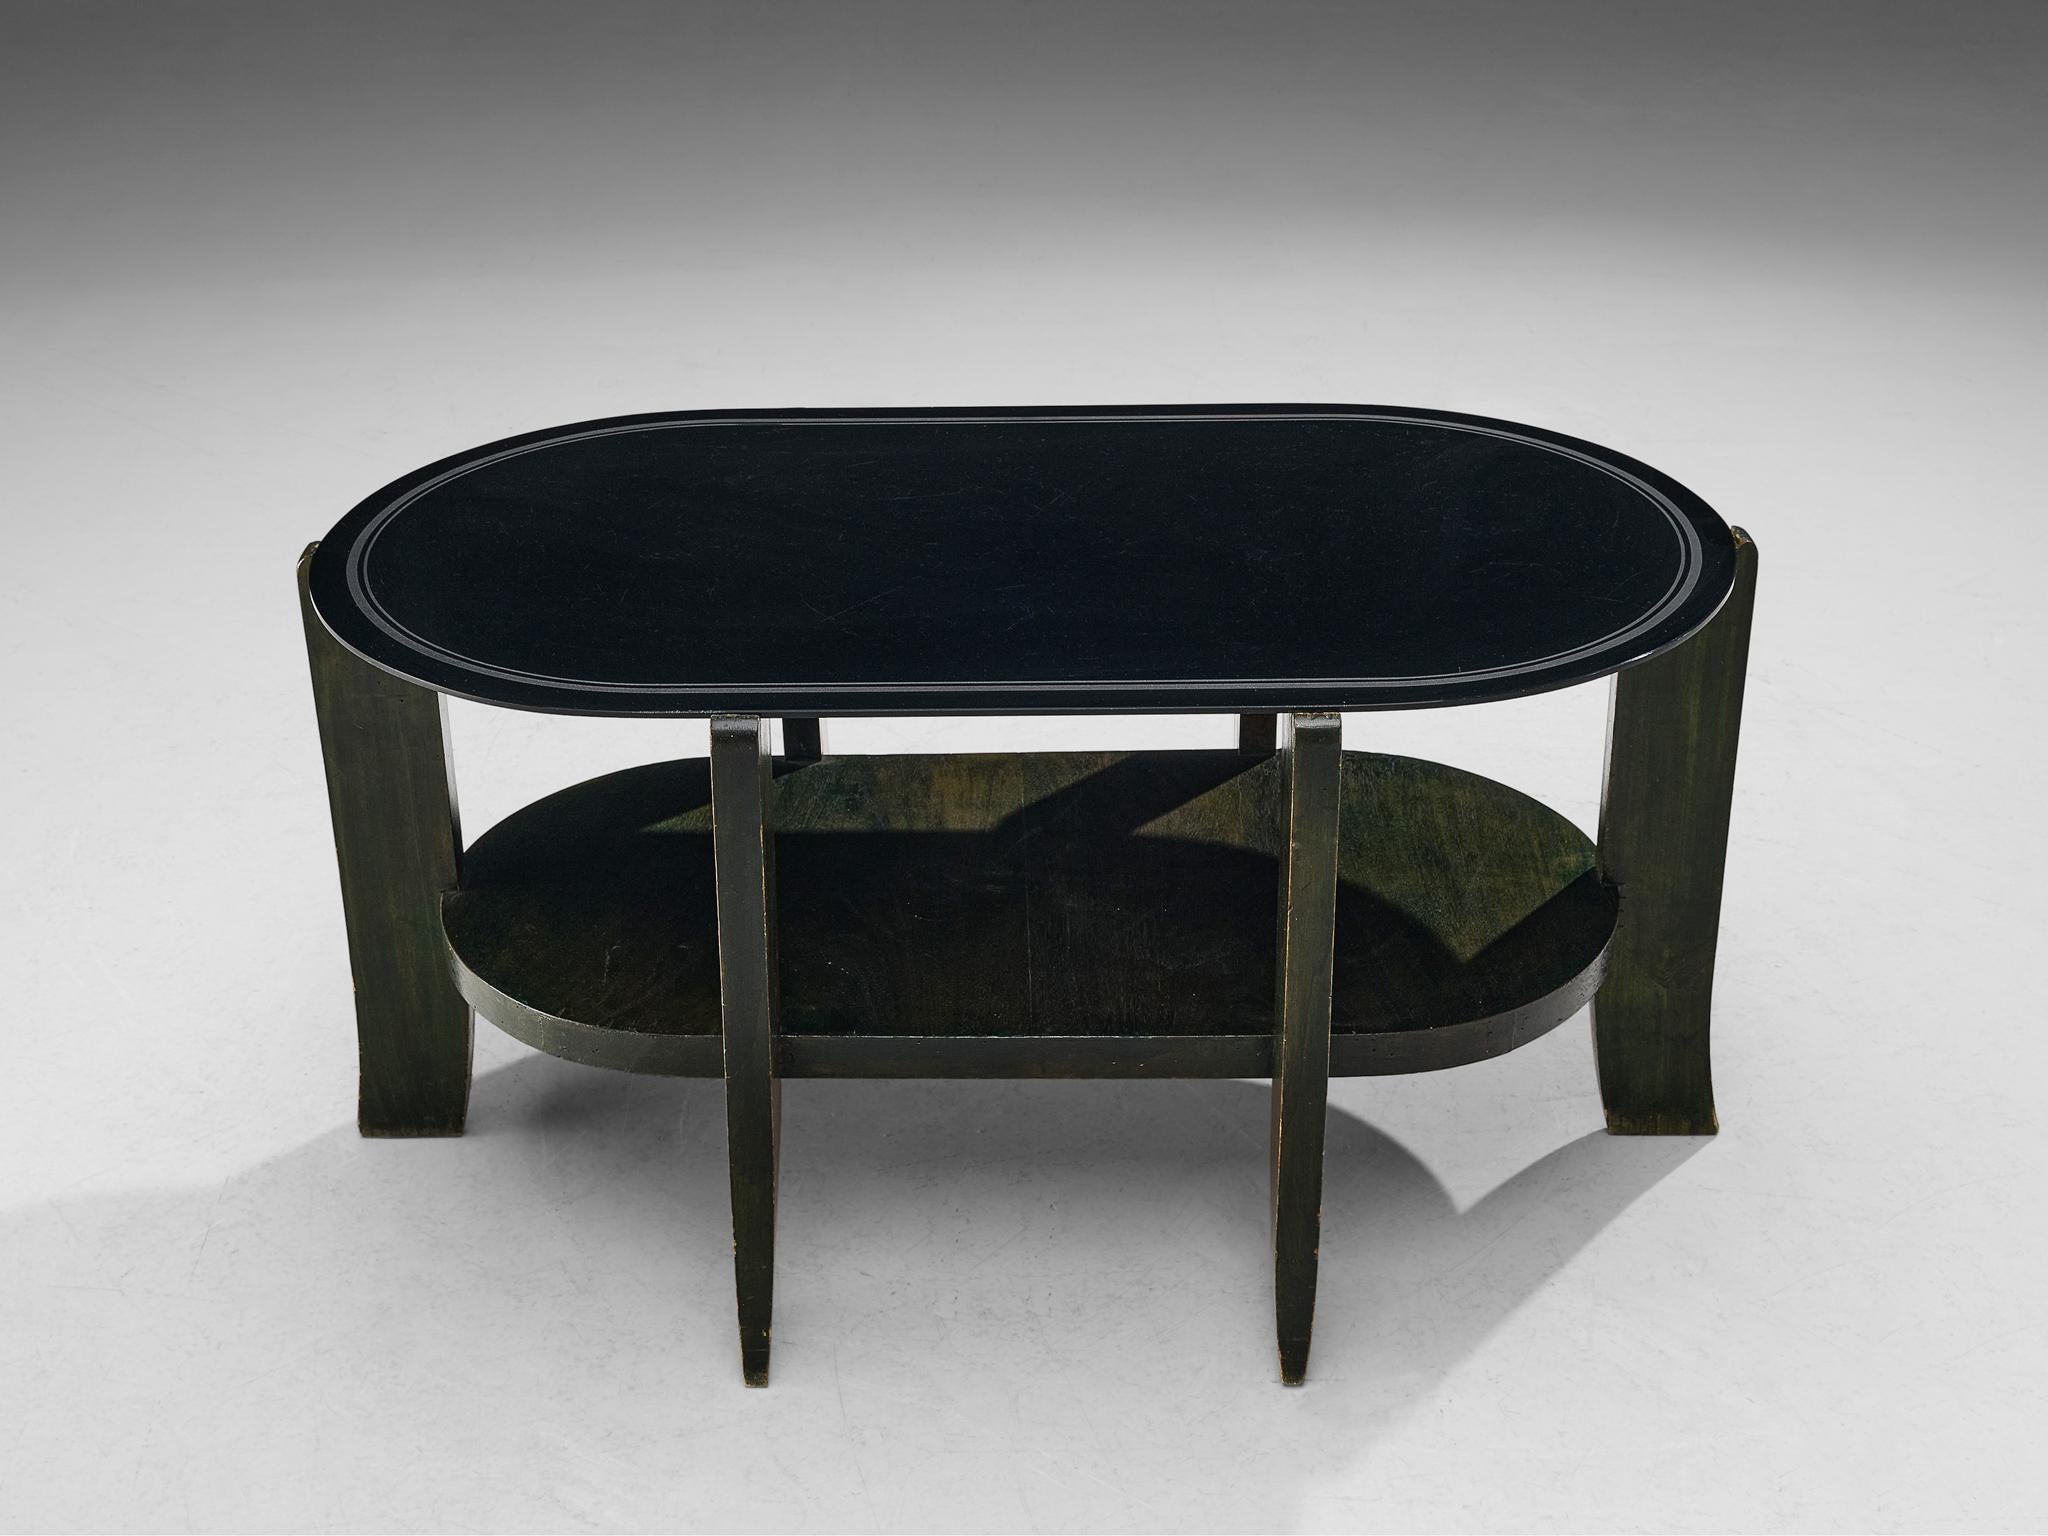 Italian Art Deco Oval Shaped Coffee Table in Green Stained Wood